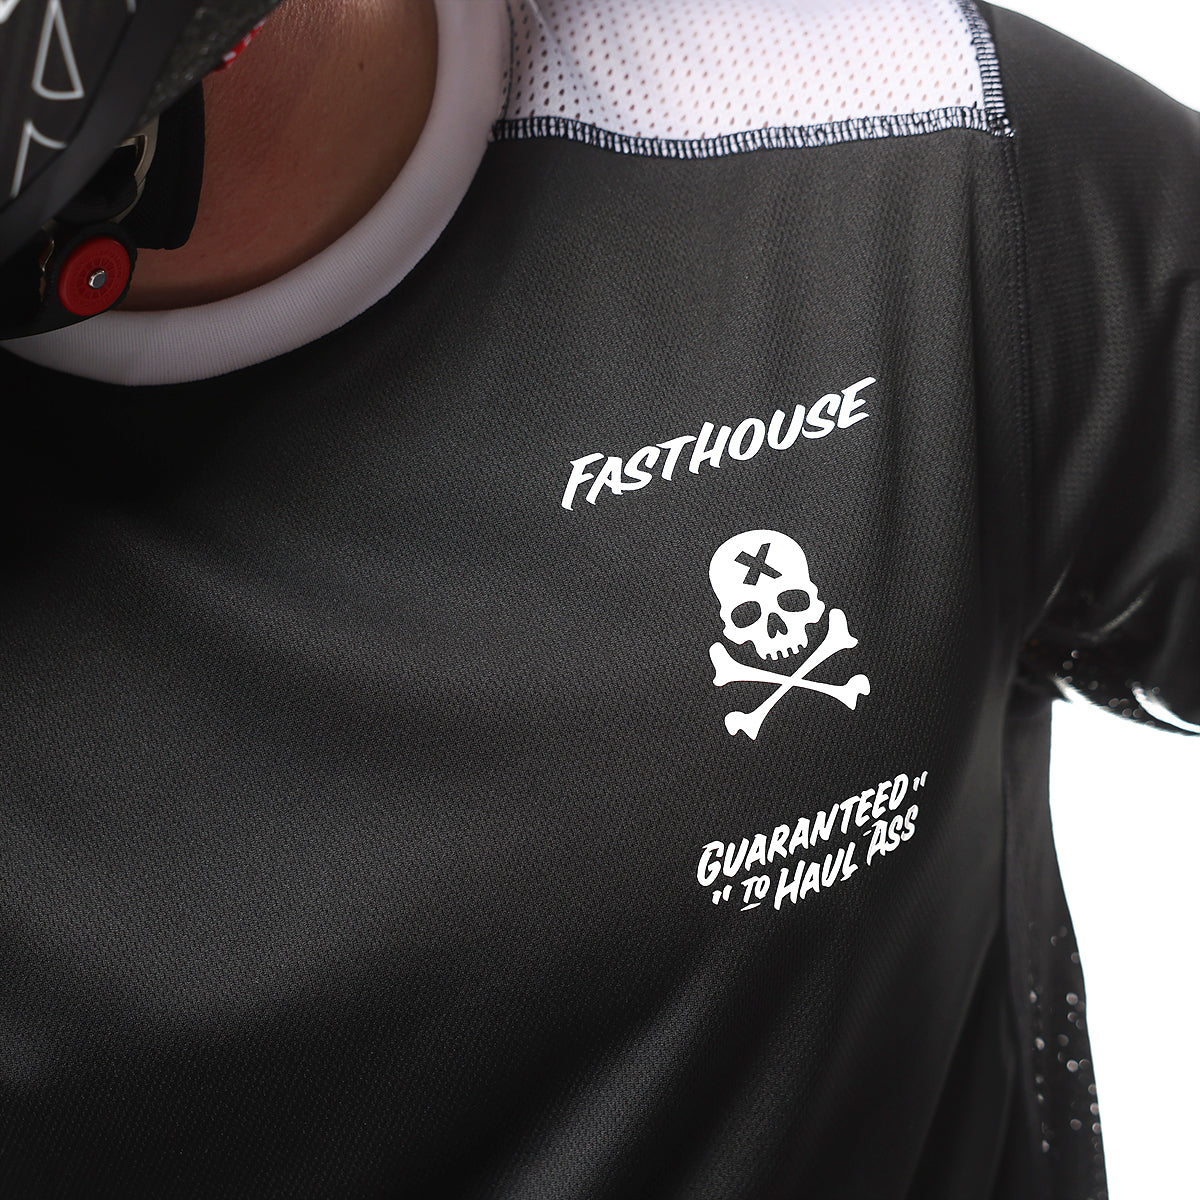 Grindhouse Knox Jersey - Black/White